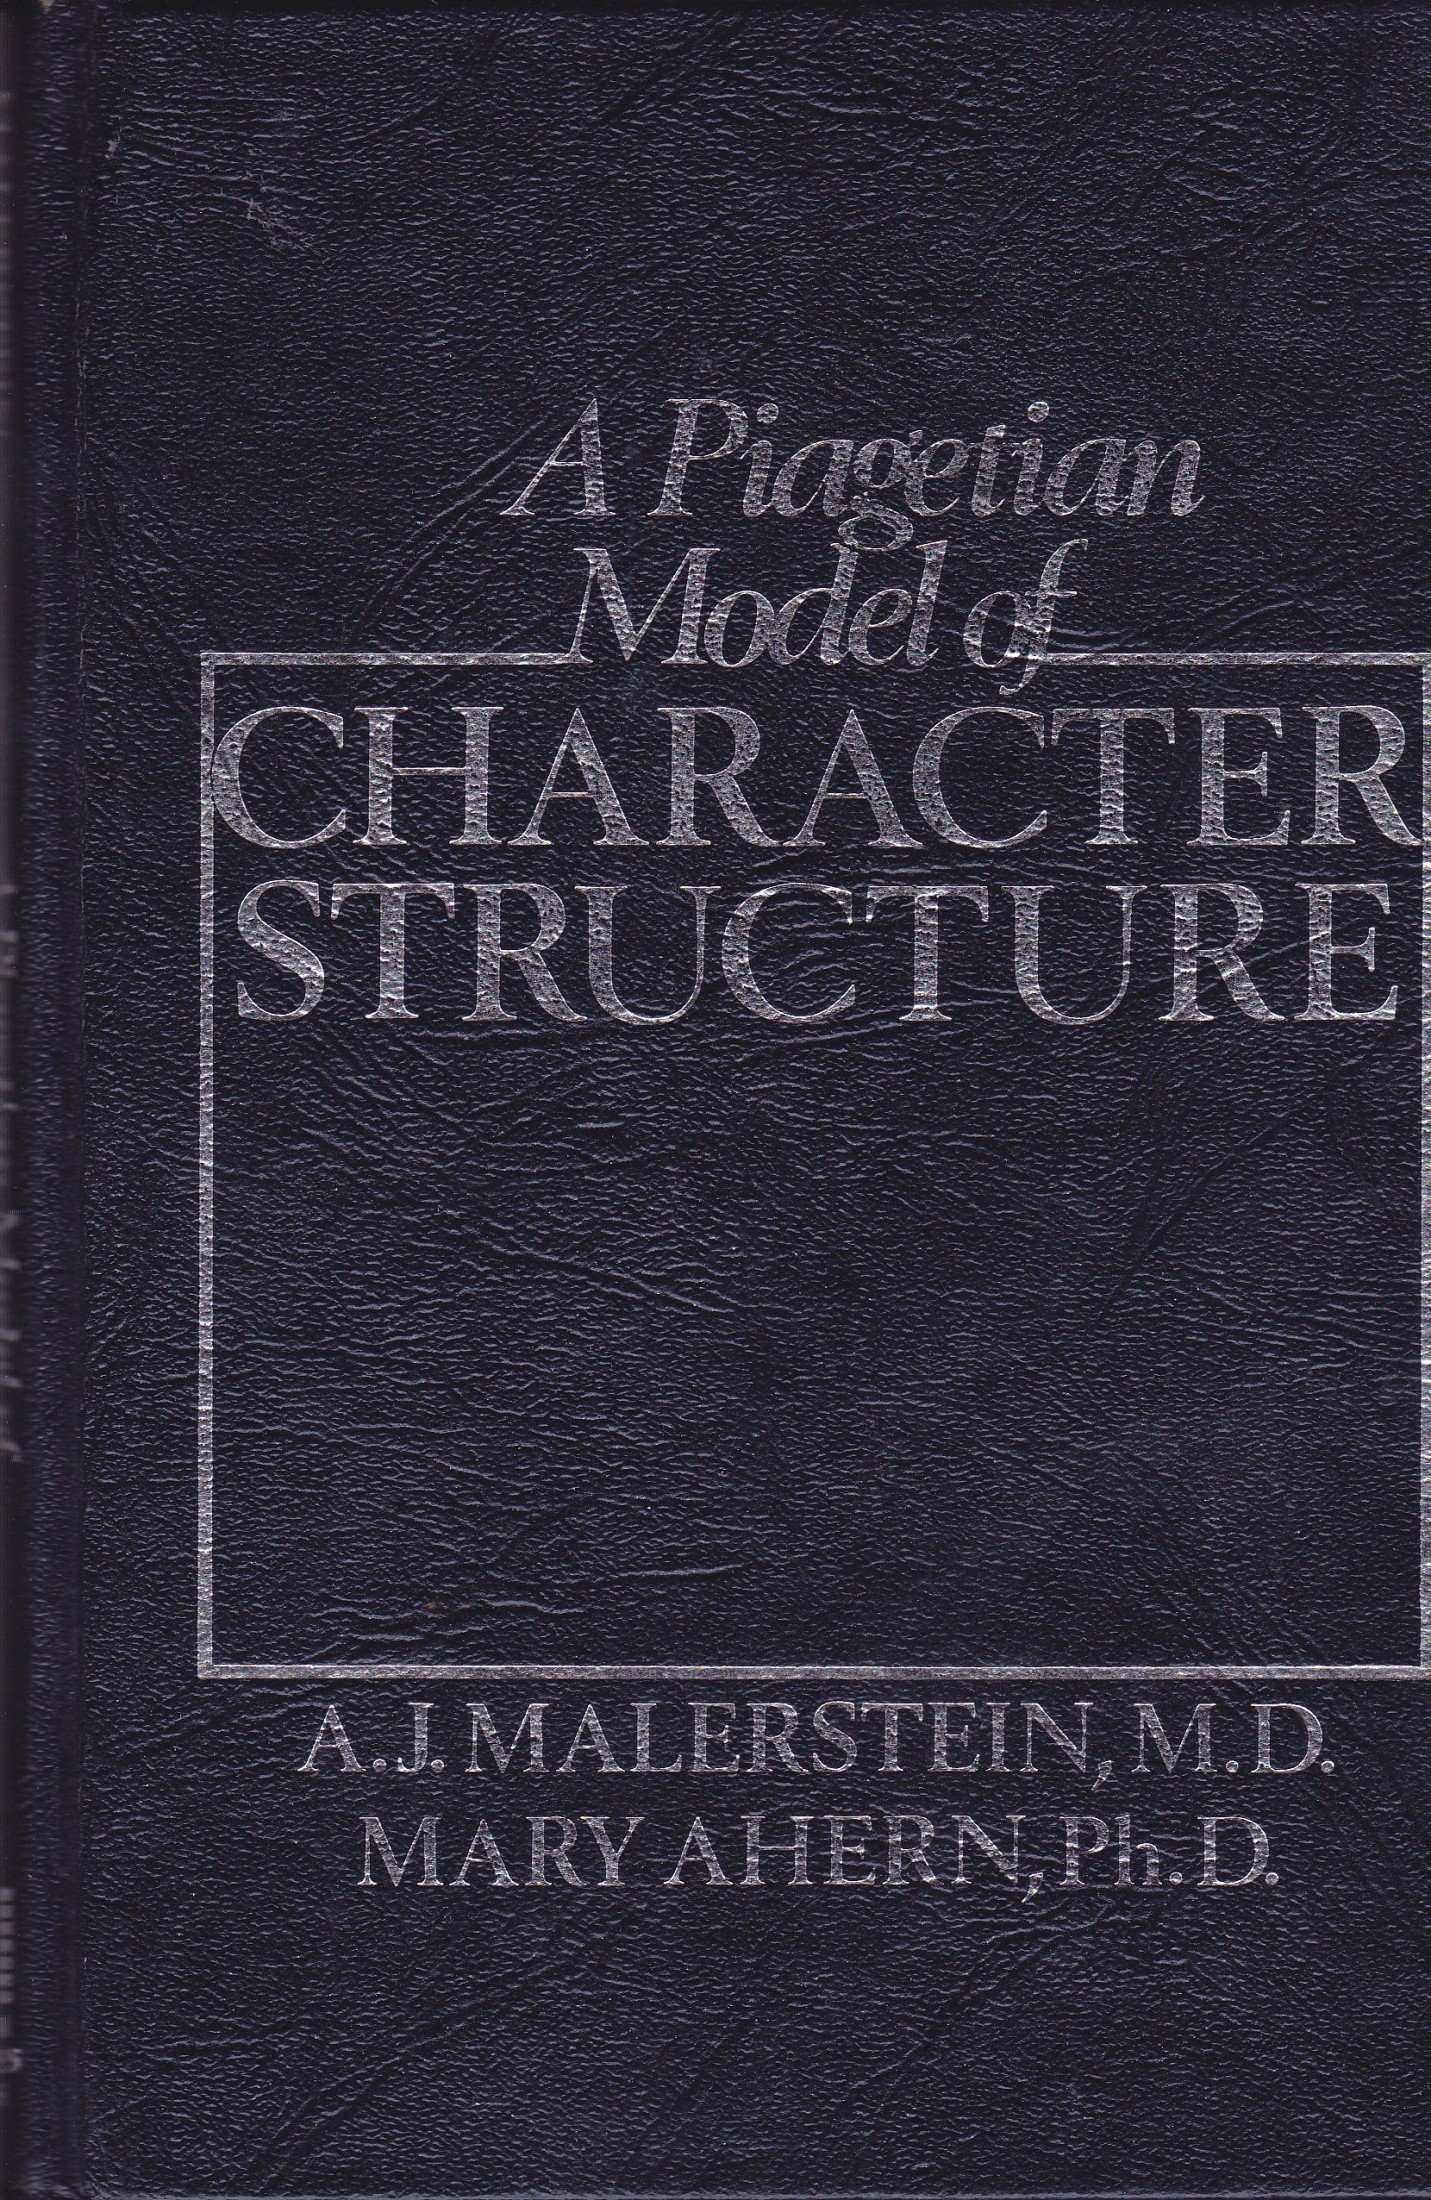 A Piagetian Model of Character Structure